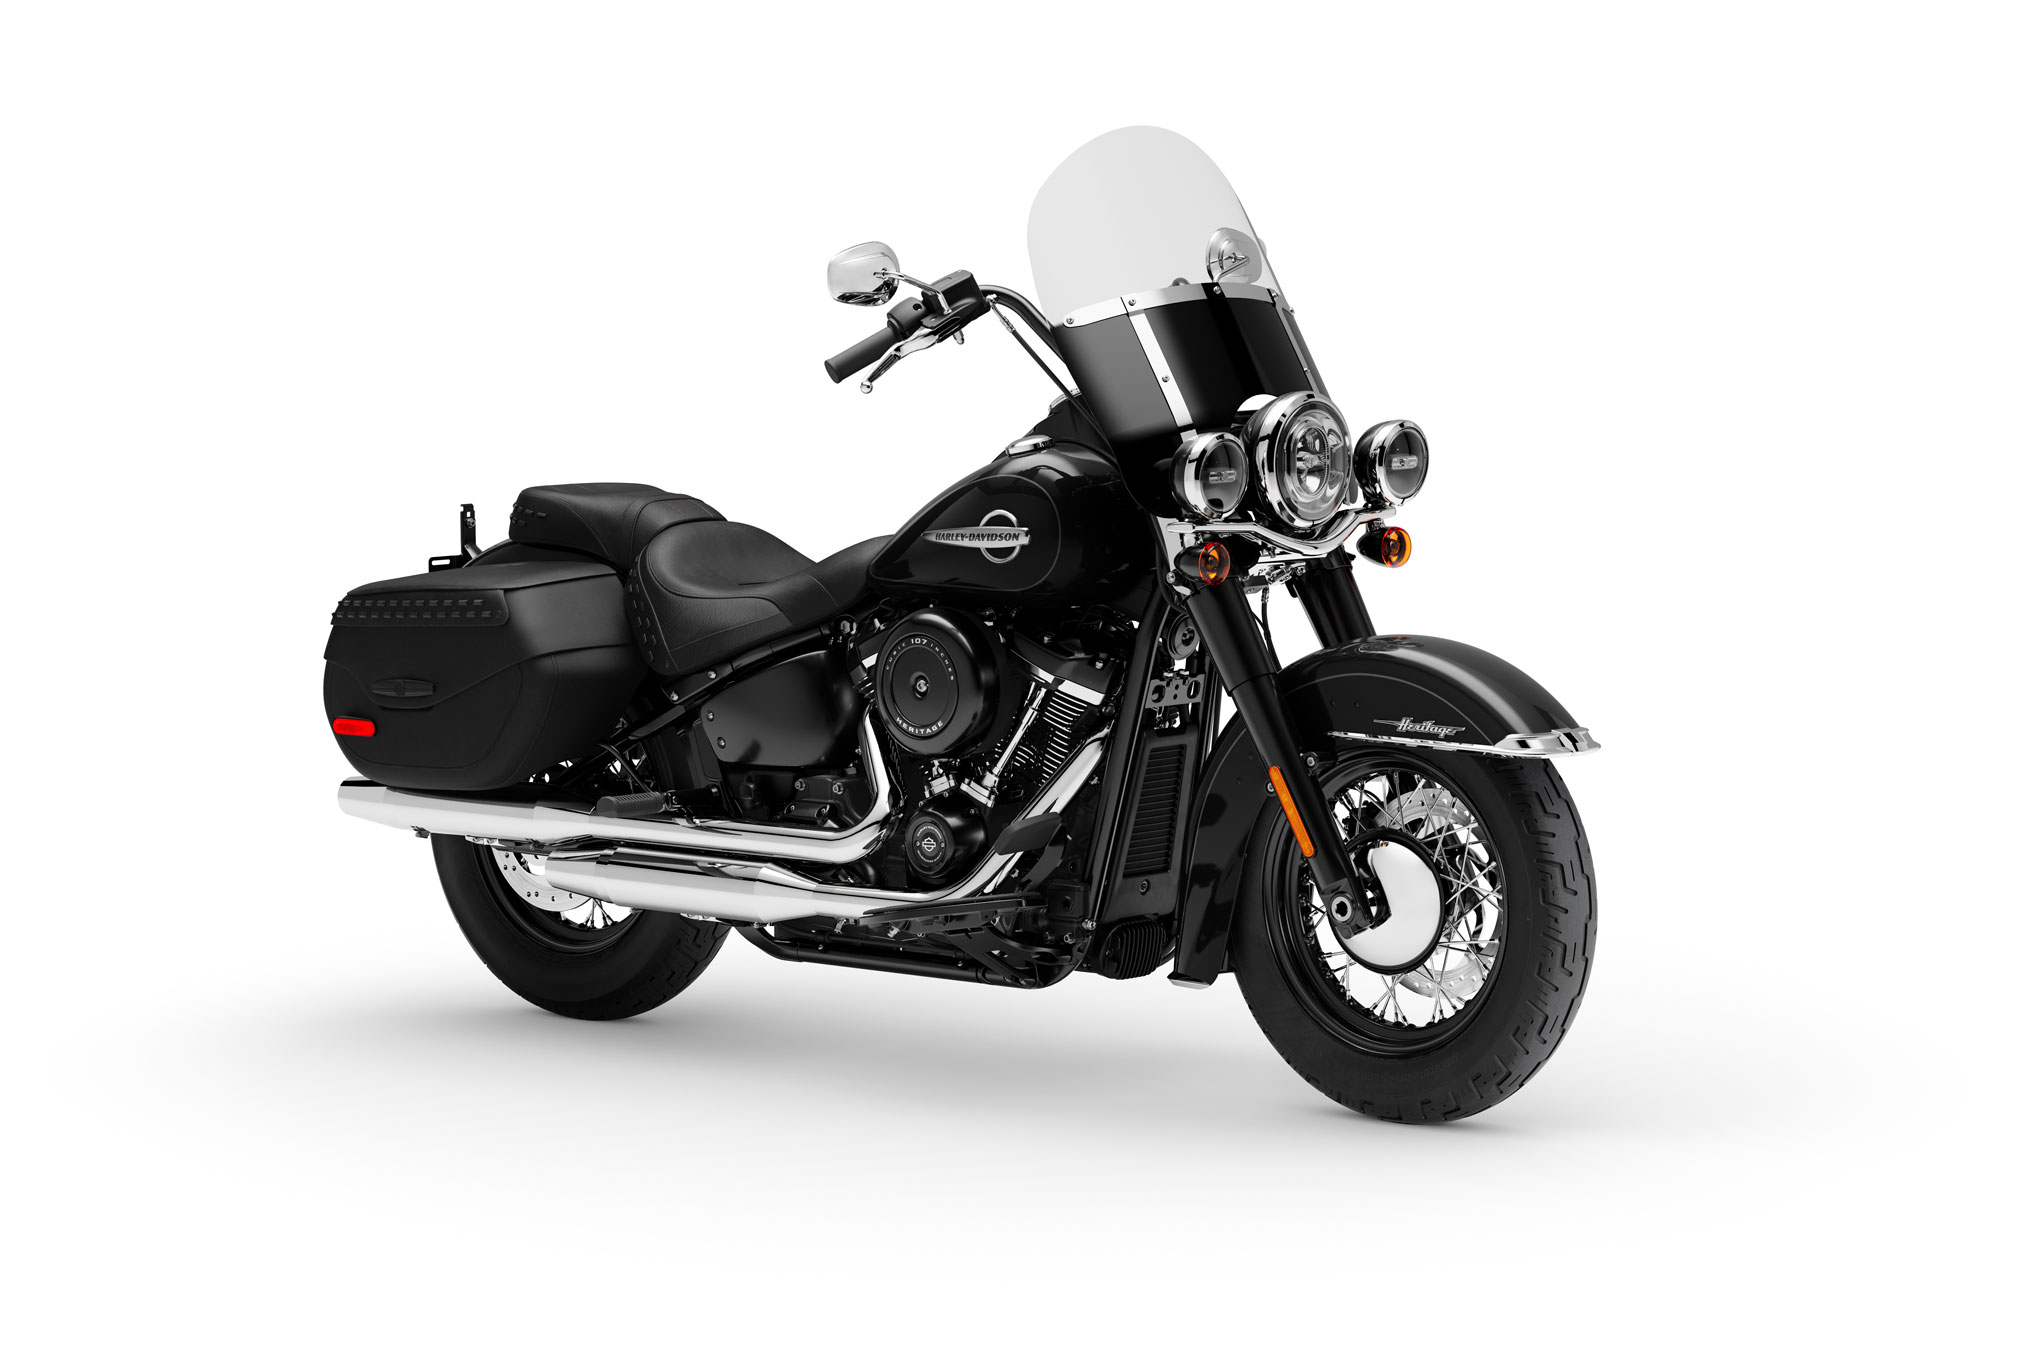  2019 Harley Davidson Heritage Classic Guide Total Motorcycle